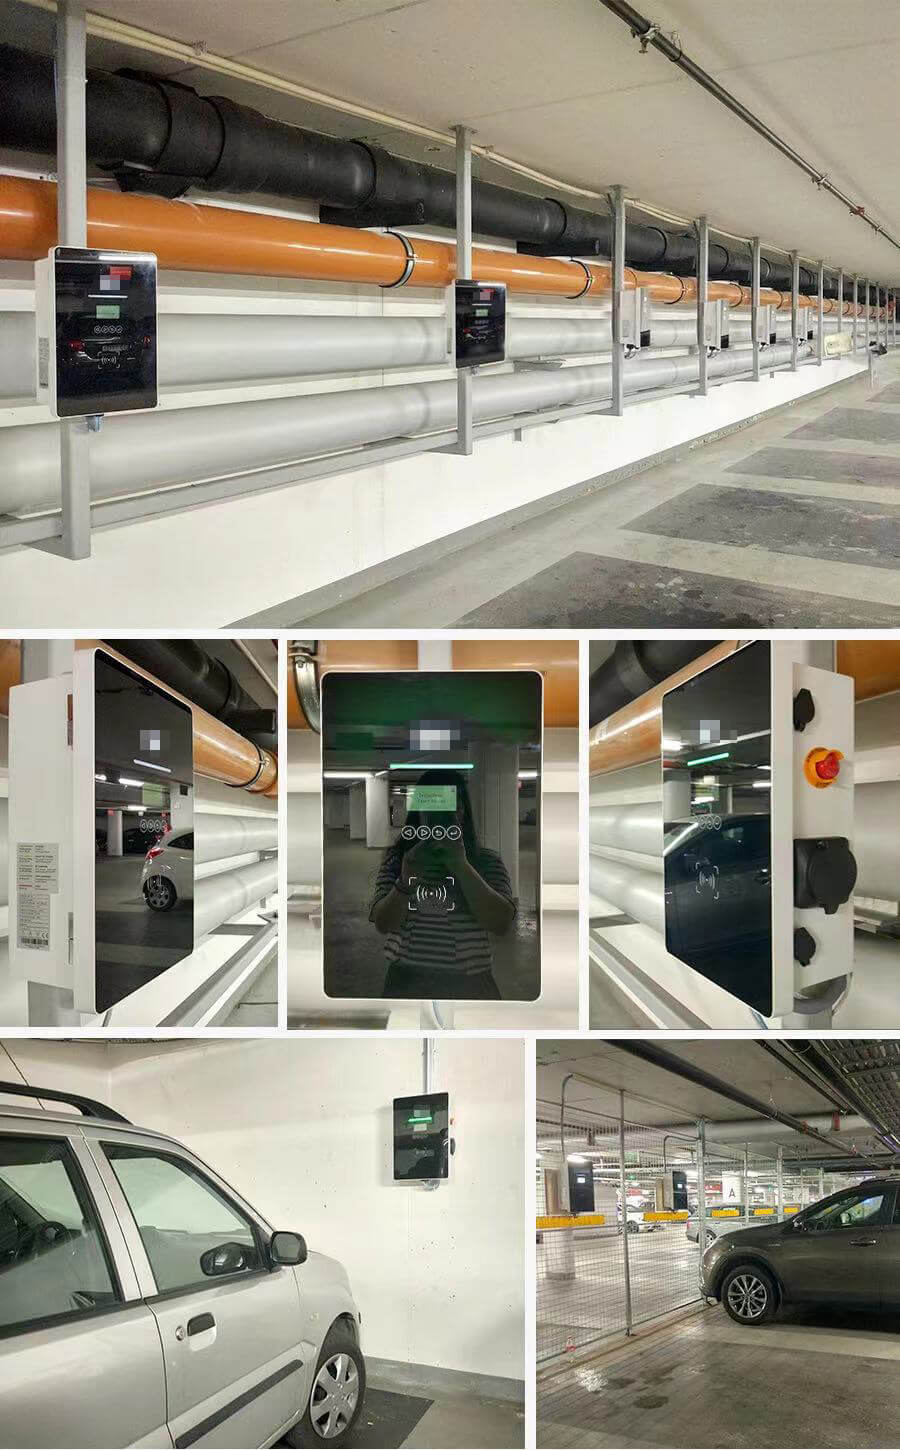 ev-chargers-for-norway